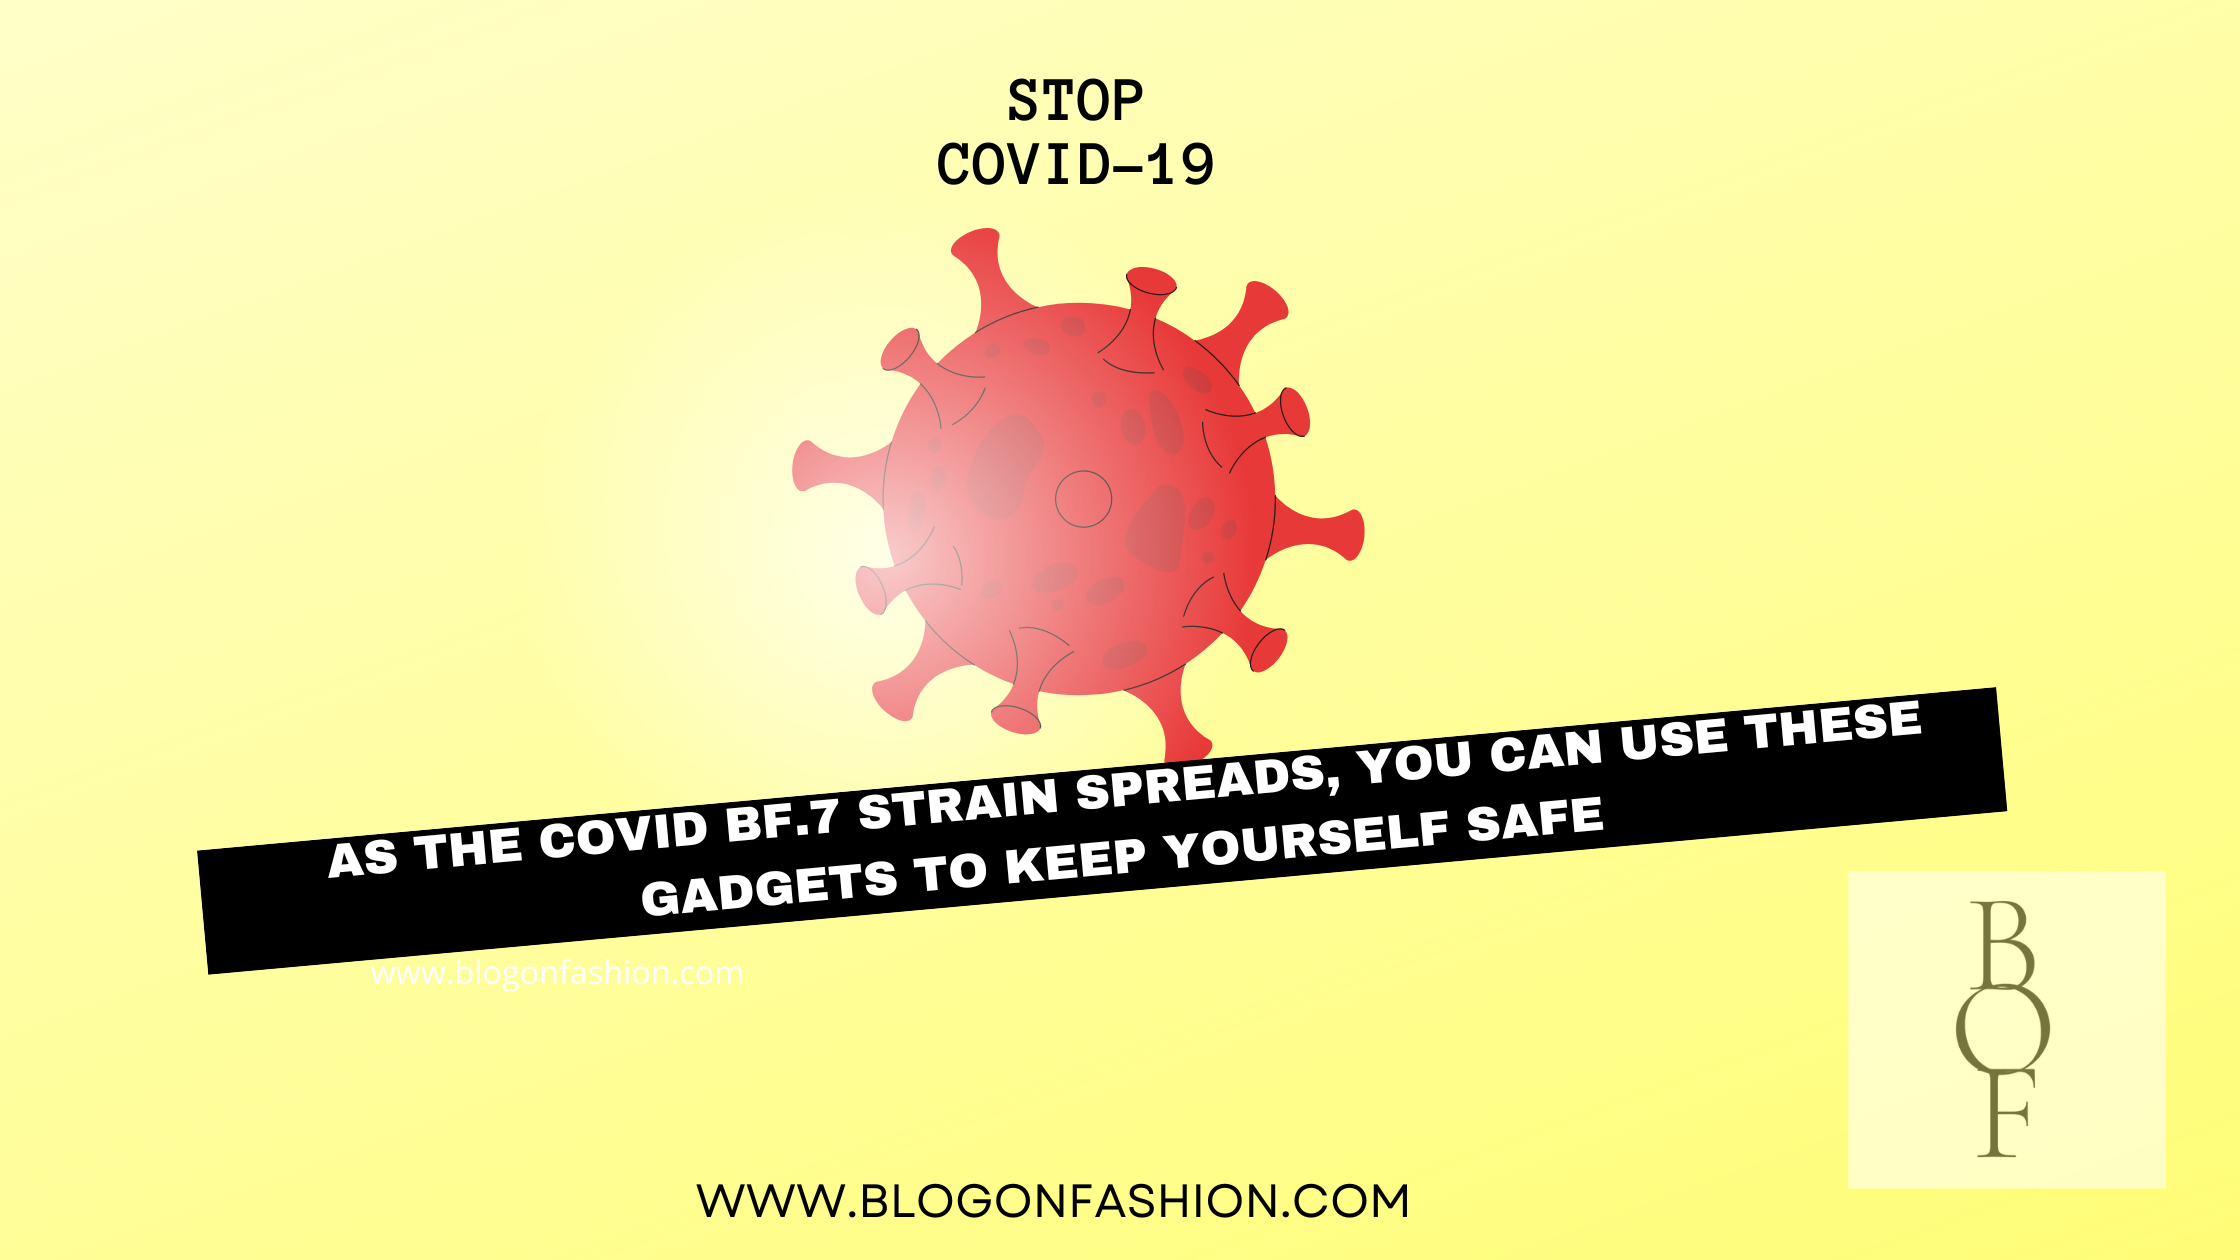 As the COVID Bf.7 strain spreads, you can use these gadgets to keep yourself safe